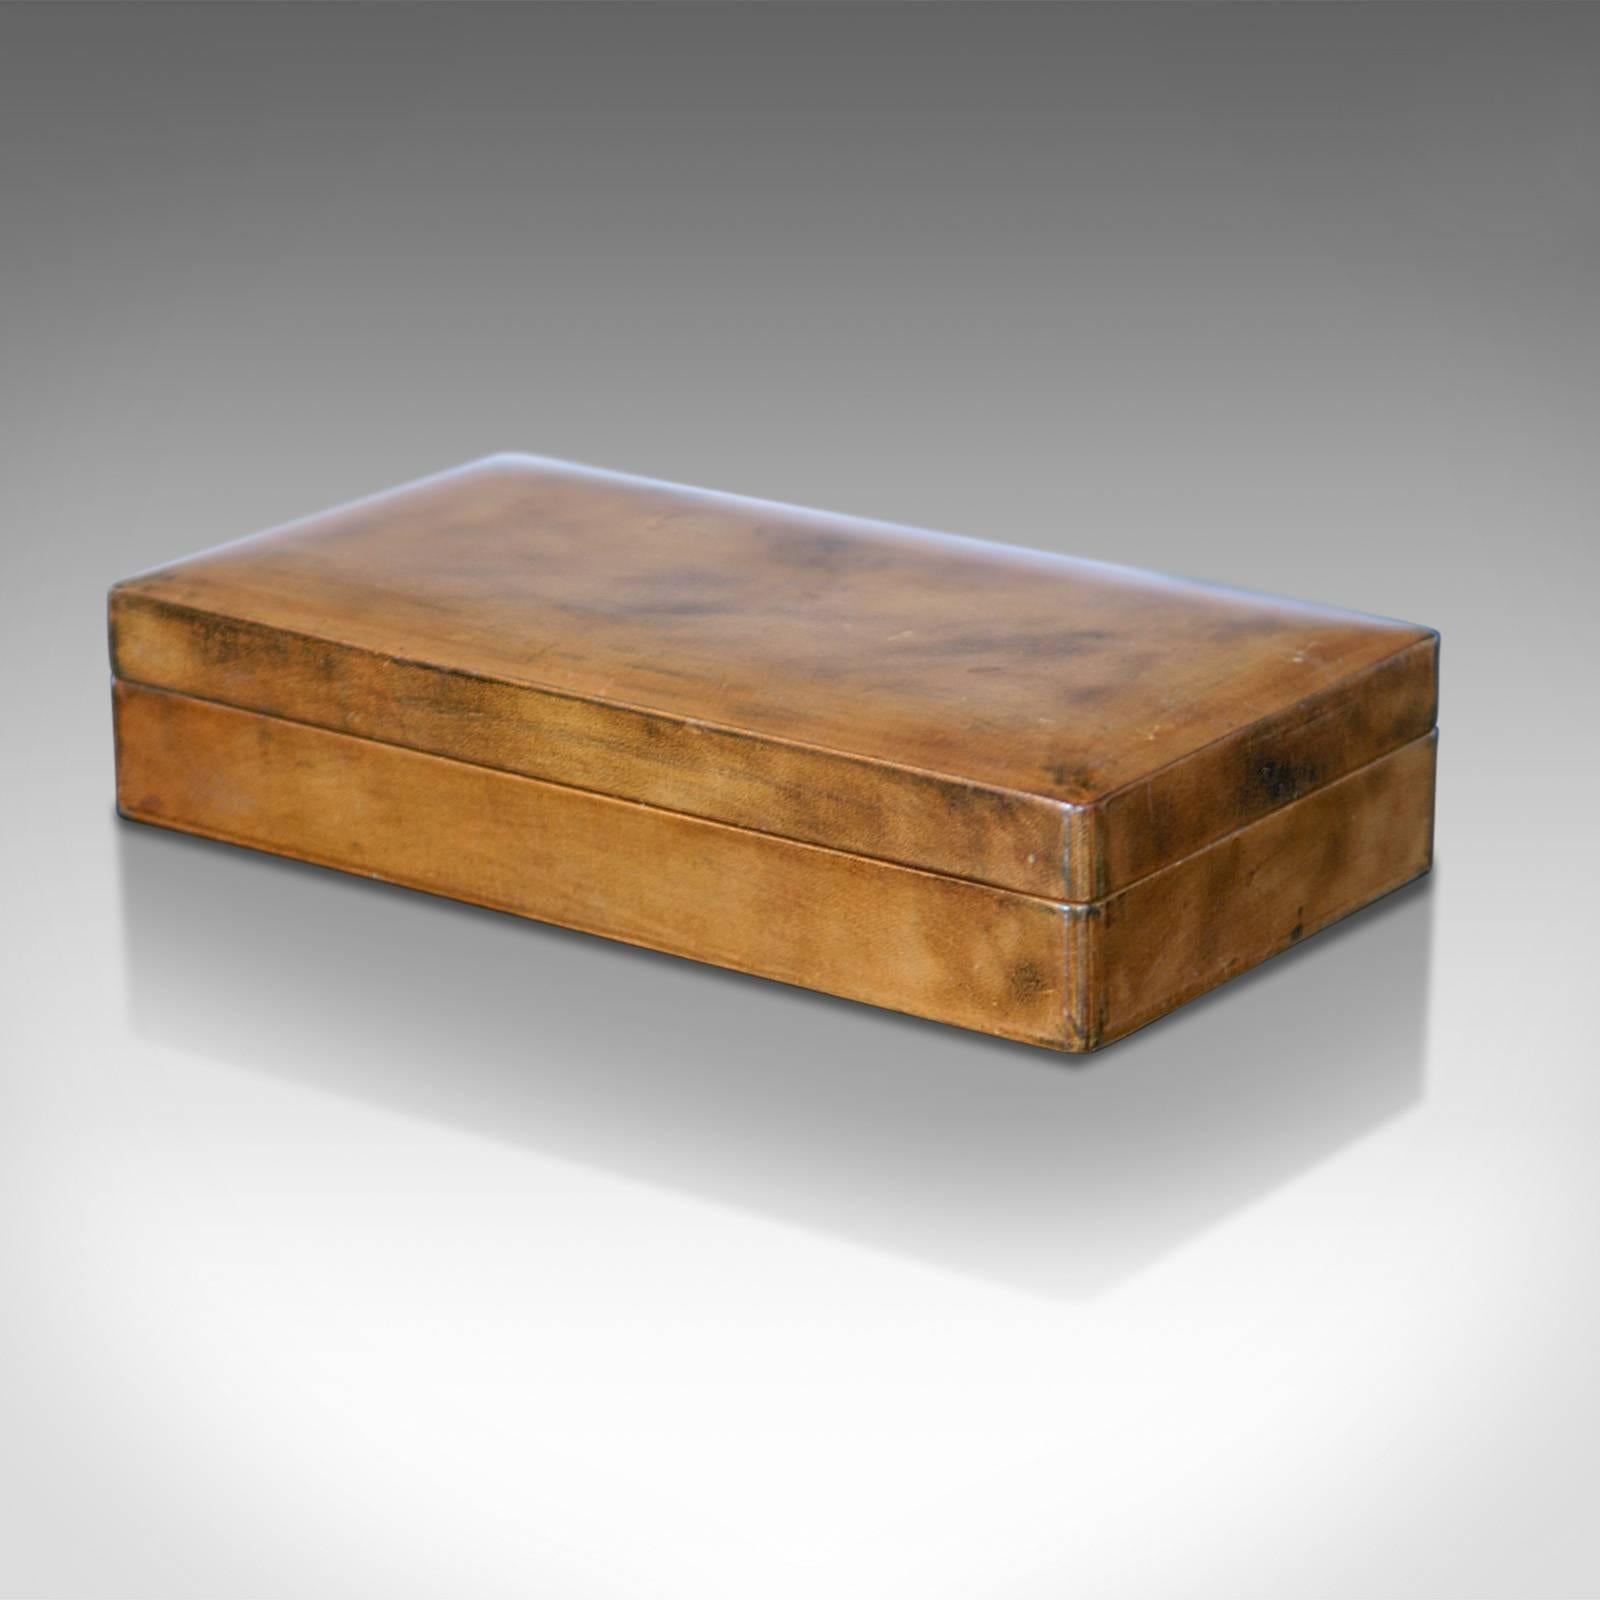 This is a Mid-Century leather card box.

Beautifully crafted with a tanned, aged patina this card case is exceptionally well made and perfect for a variety of small storage purposes or just simply for display.

Made in Italy for the famous store